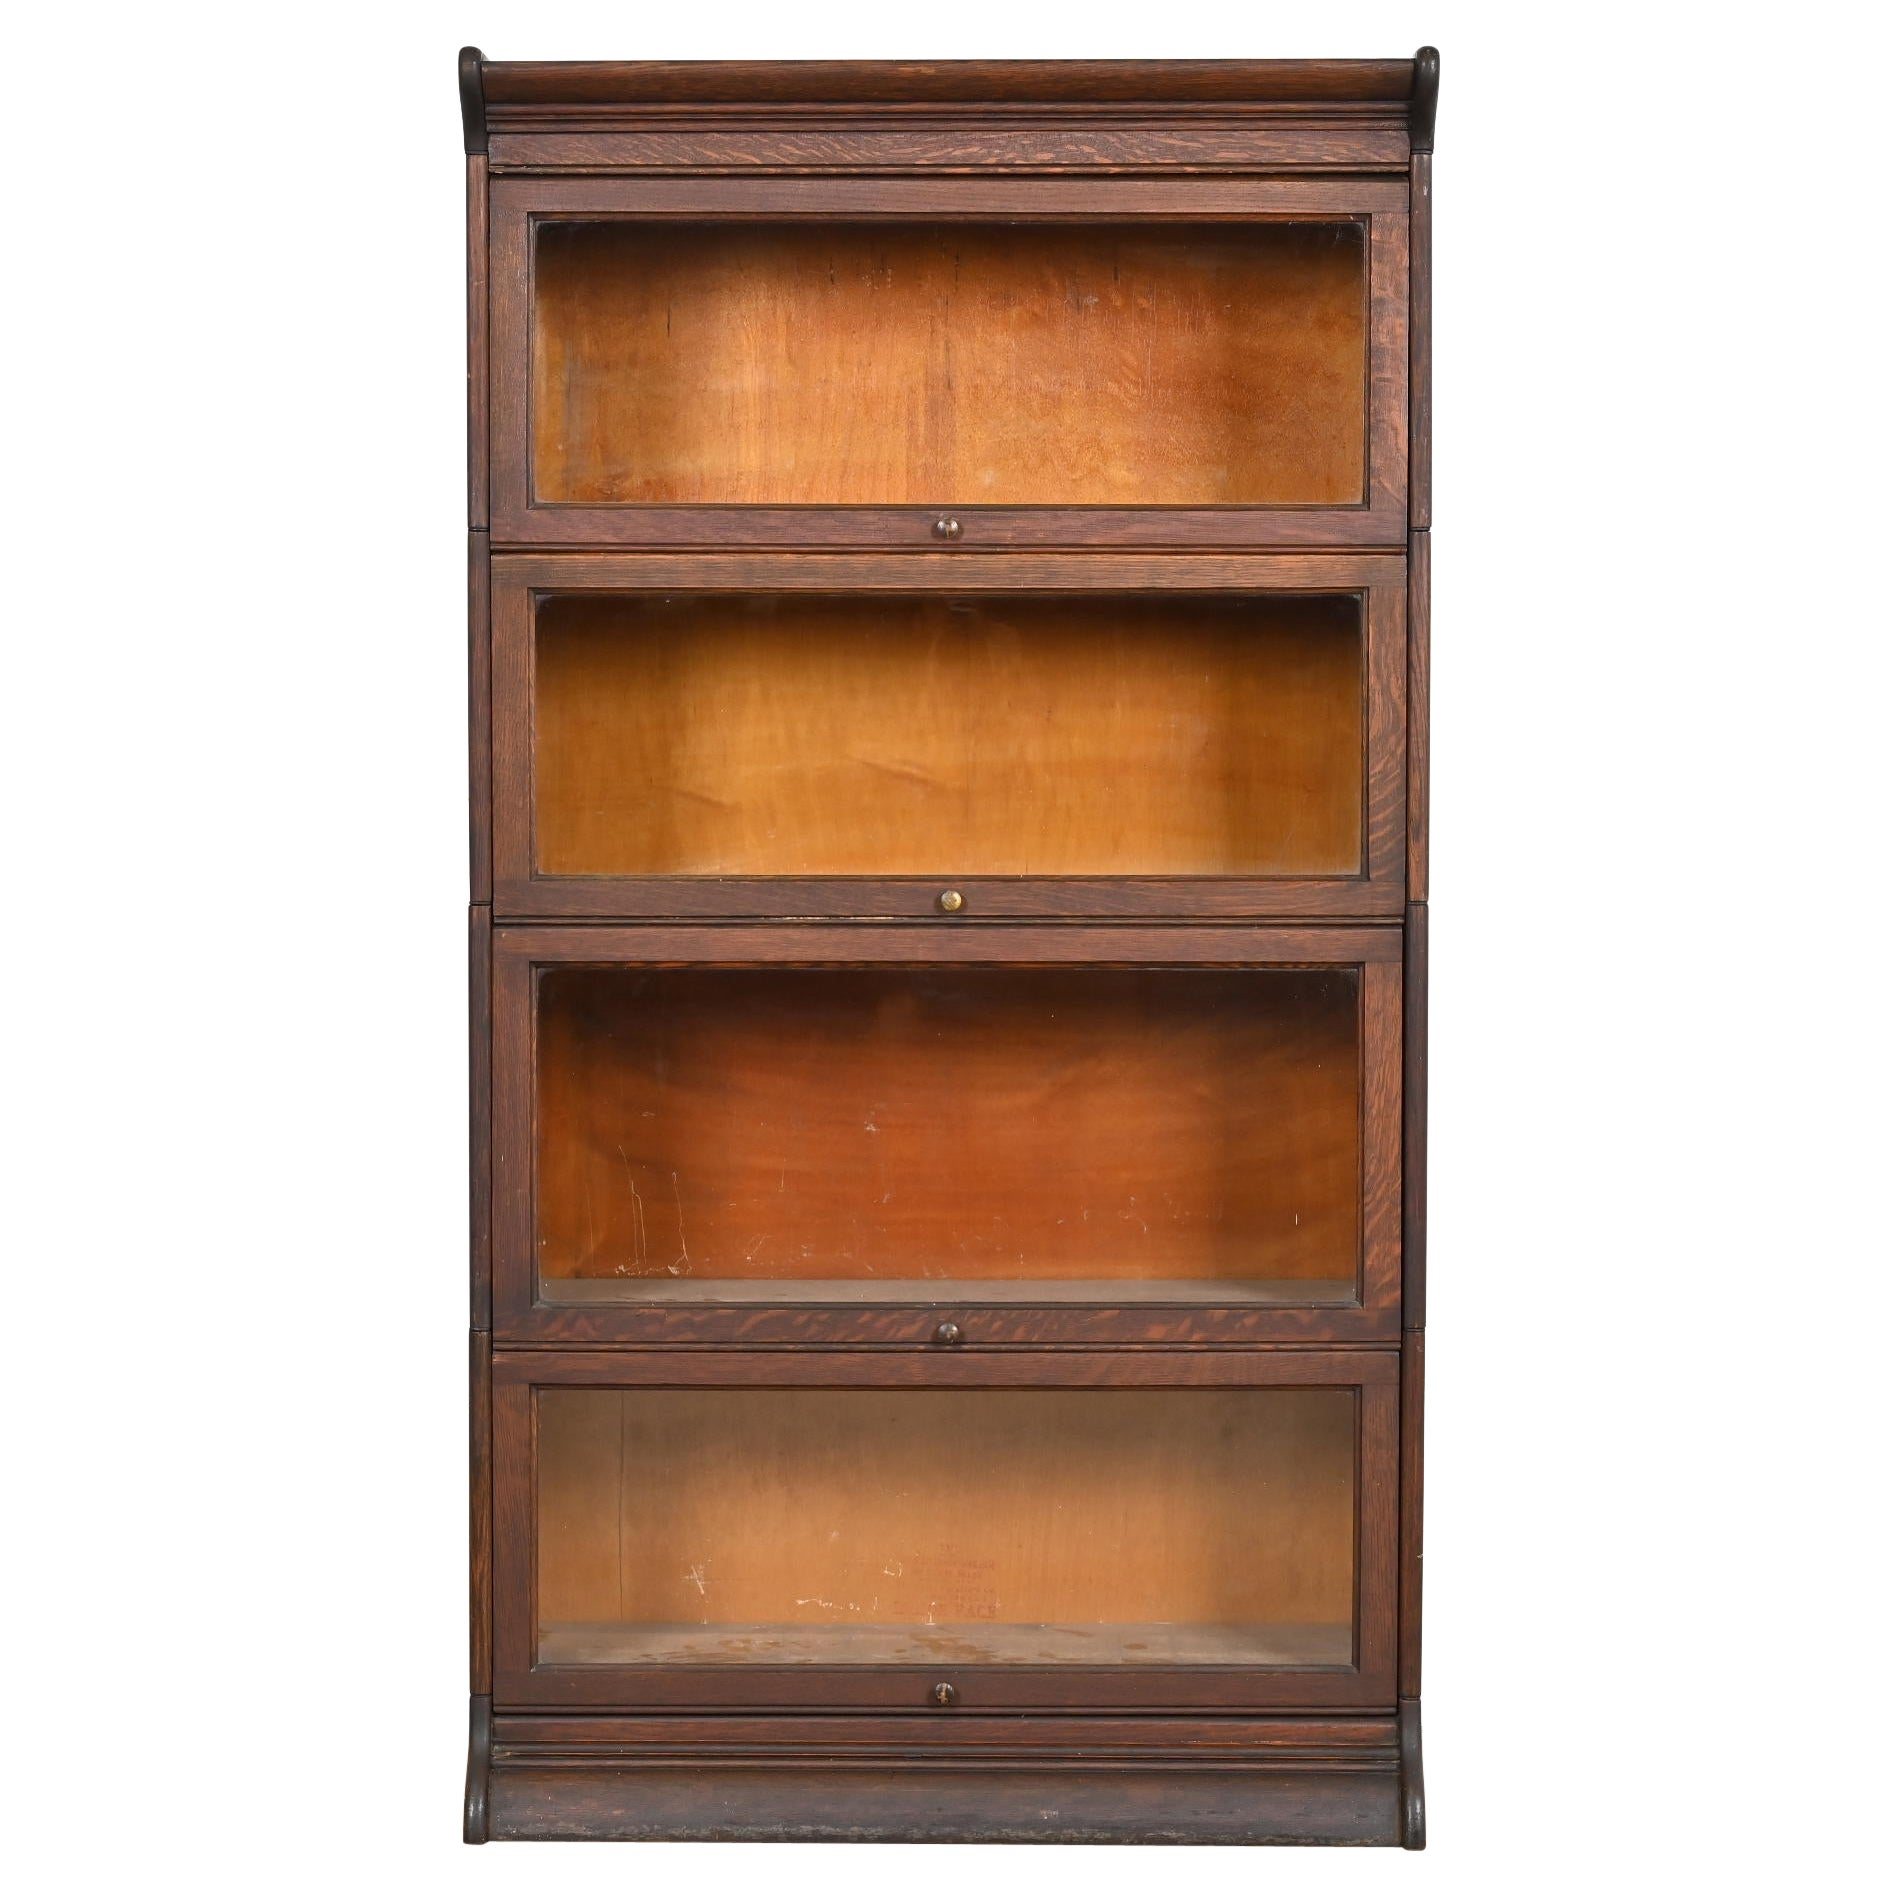 Antique Arts & Crafts Oak Four-Stack Barrister Bookcase by Gunn, circa 1920s For Sale